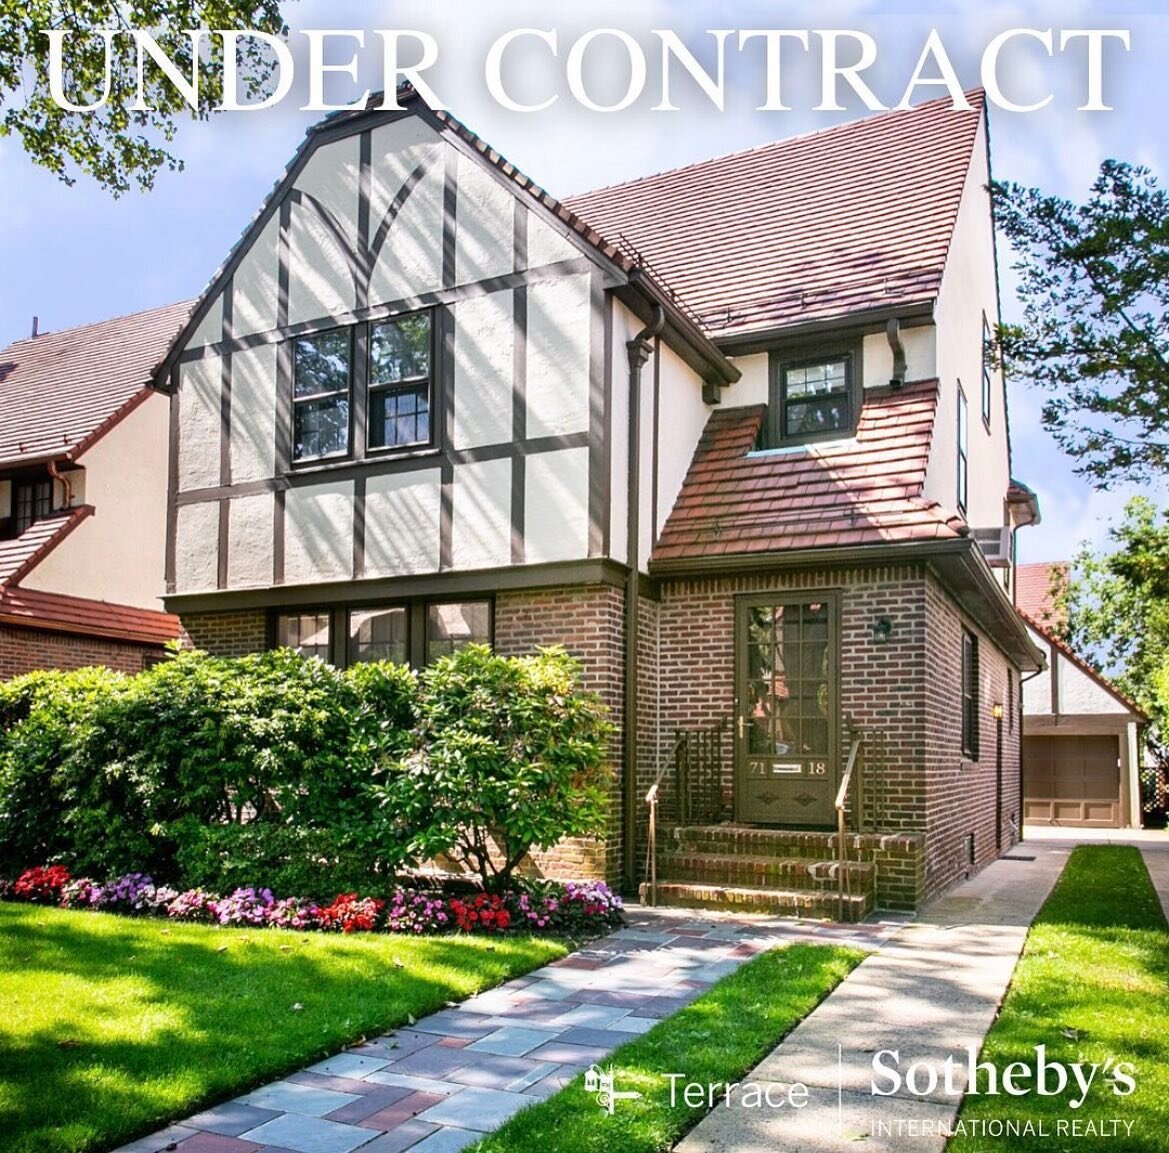 In contract at over asking price which was $1.65m, my seller&rsquo;s could not be happier!! Excited to celebrate with them soon upon closing! Just 2 weeks on the market!! @terracesir #luxuryrealestate #milliondollarlisting #undercontract #foresthills